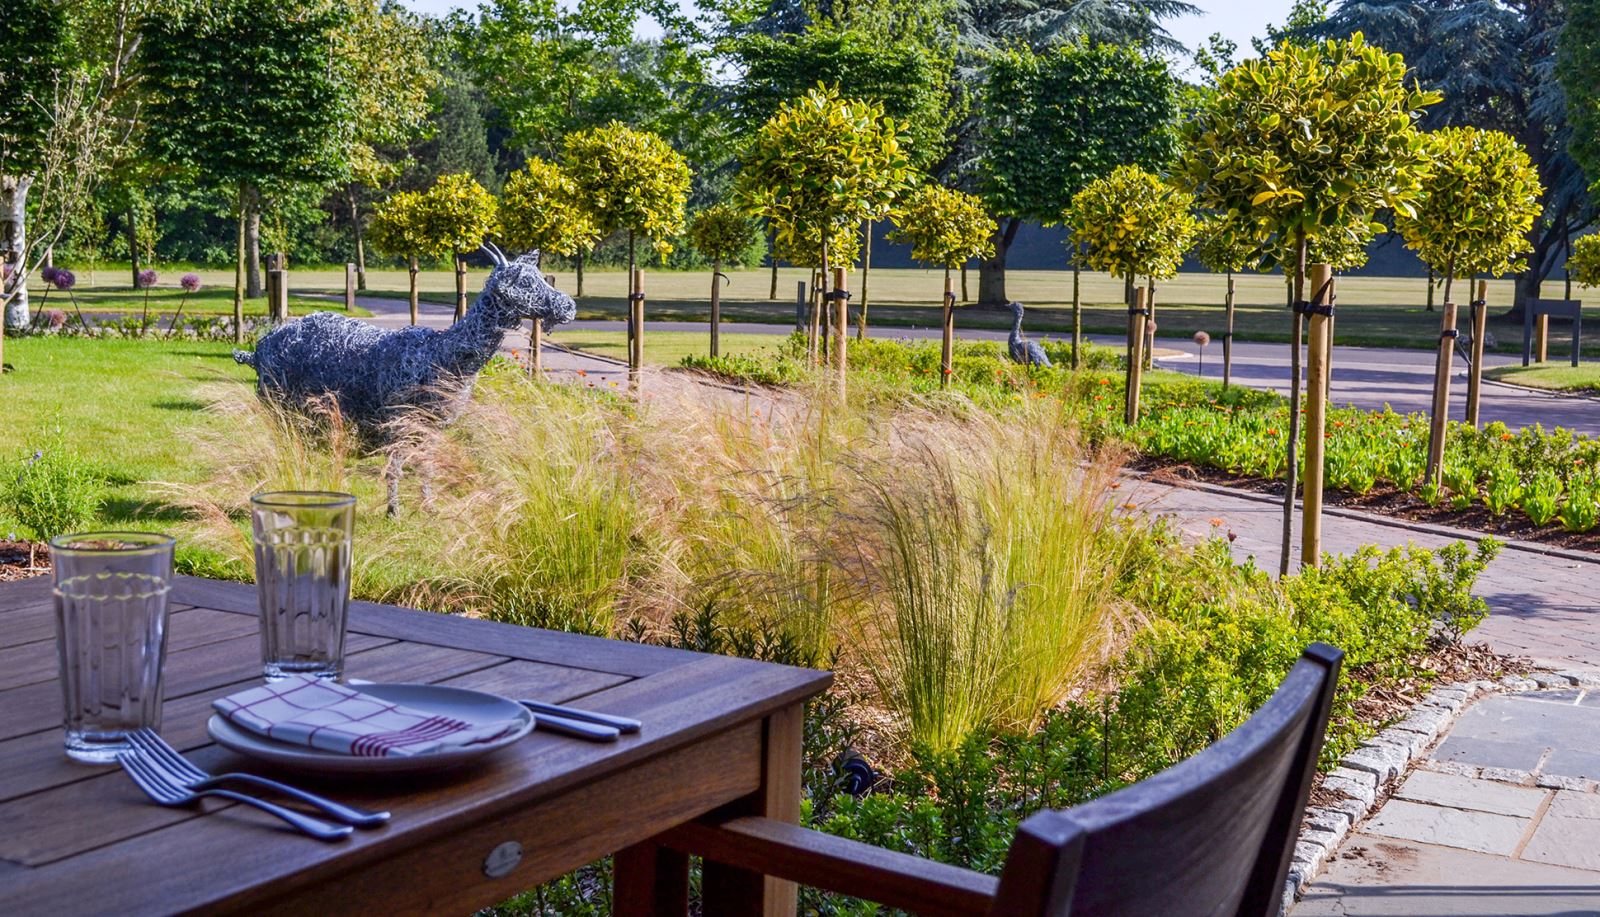 The Kitchen's Outdoor Dining Space at Chewton Glen